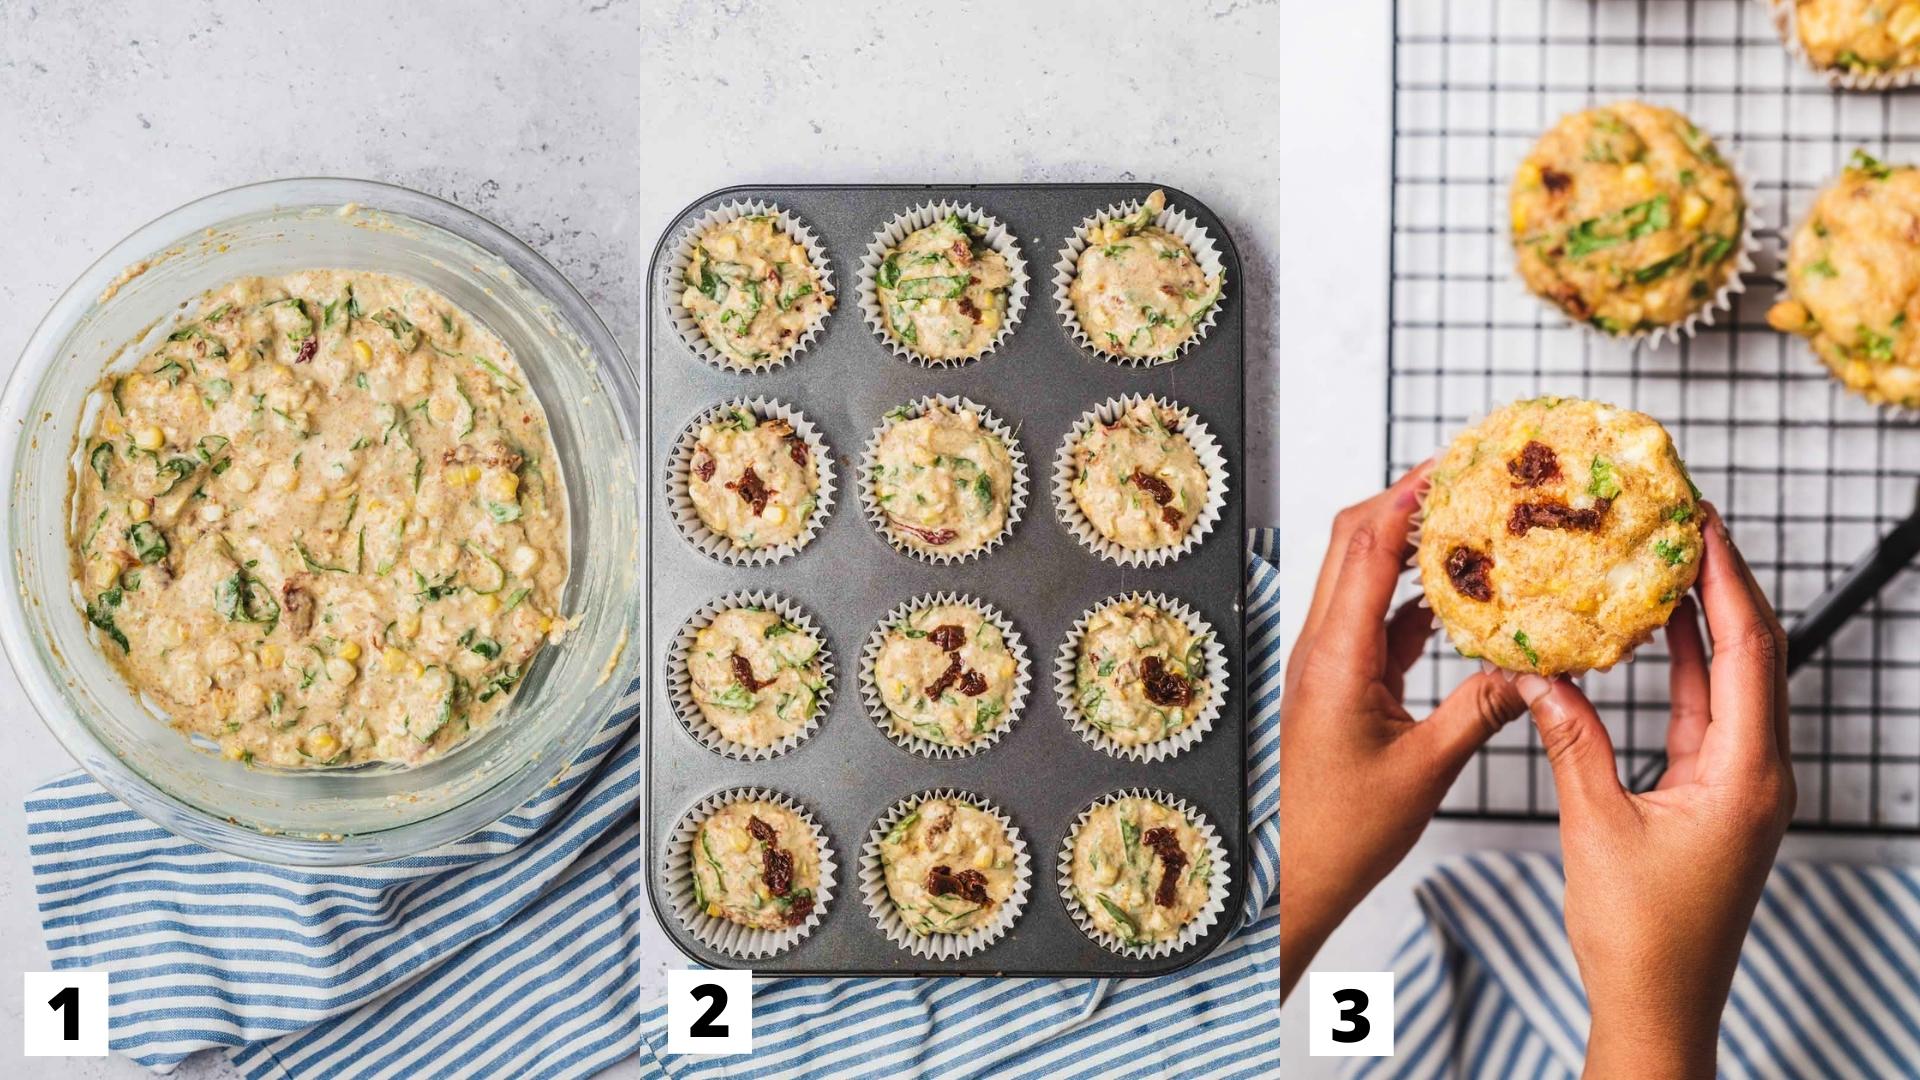 Steps 1 to 3 of how to make savoury muffins.